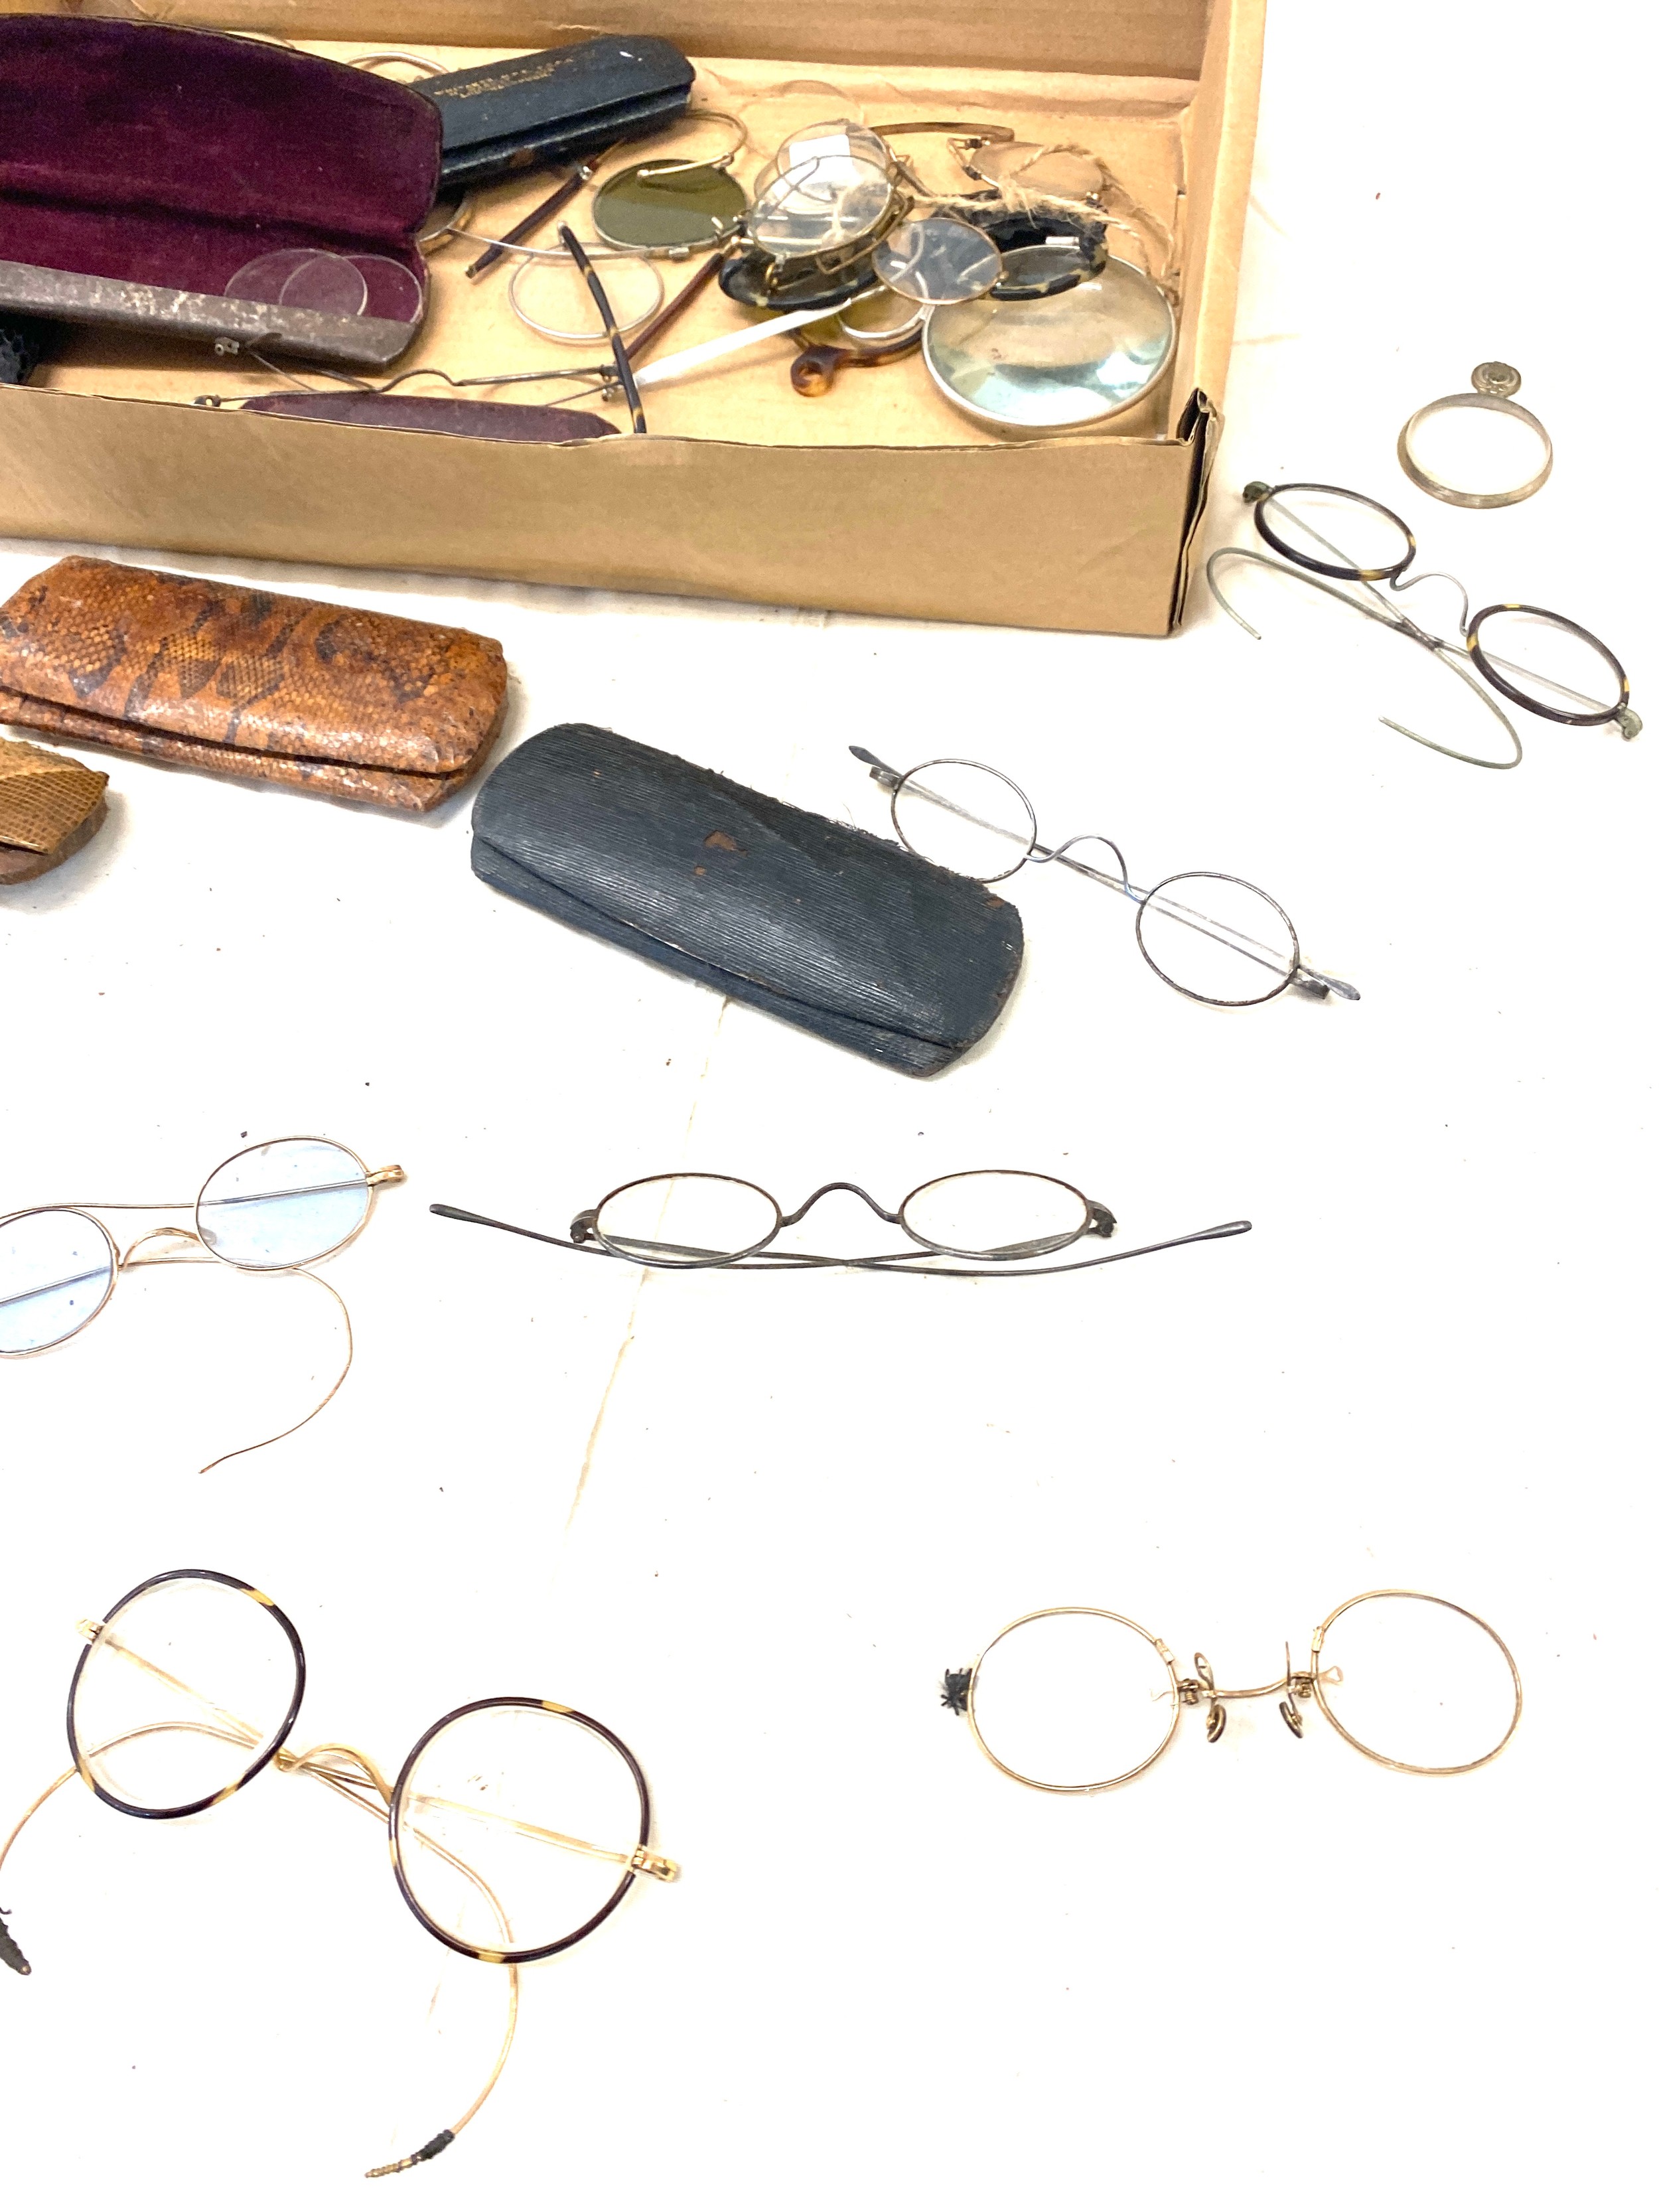 Antique spectacles - large collection - Image 4 of 4